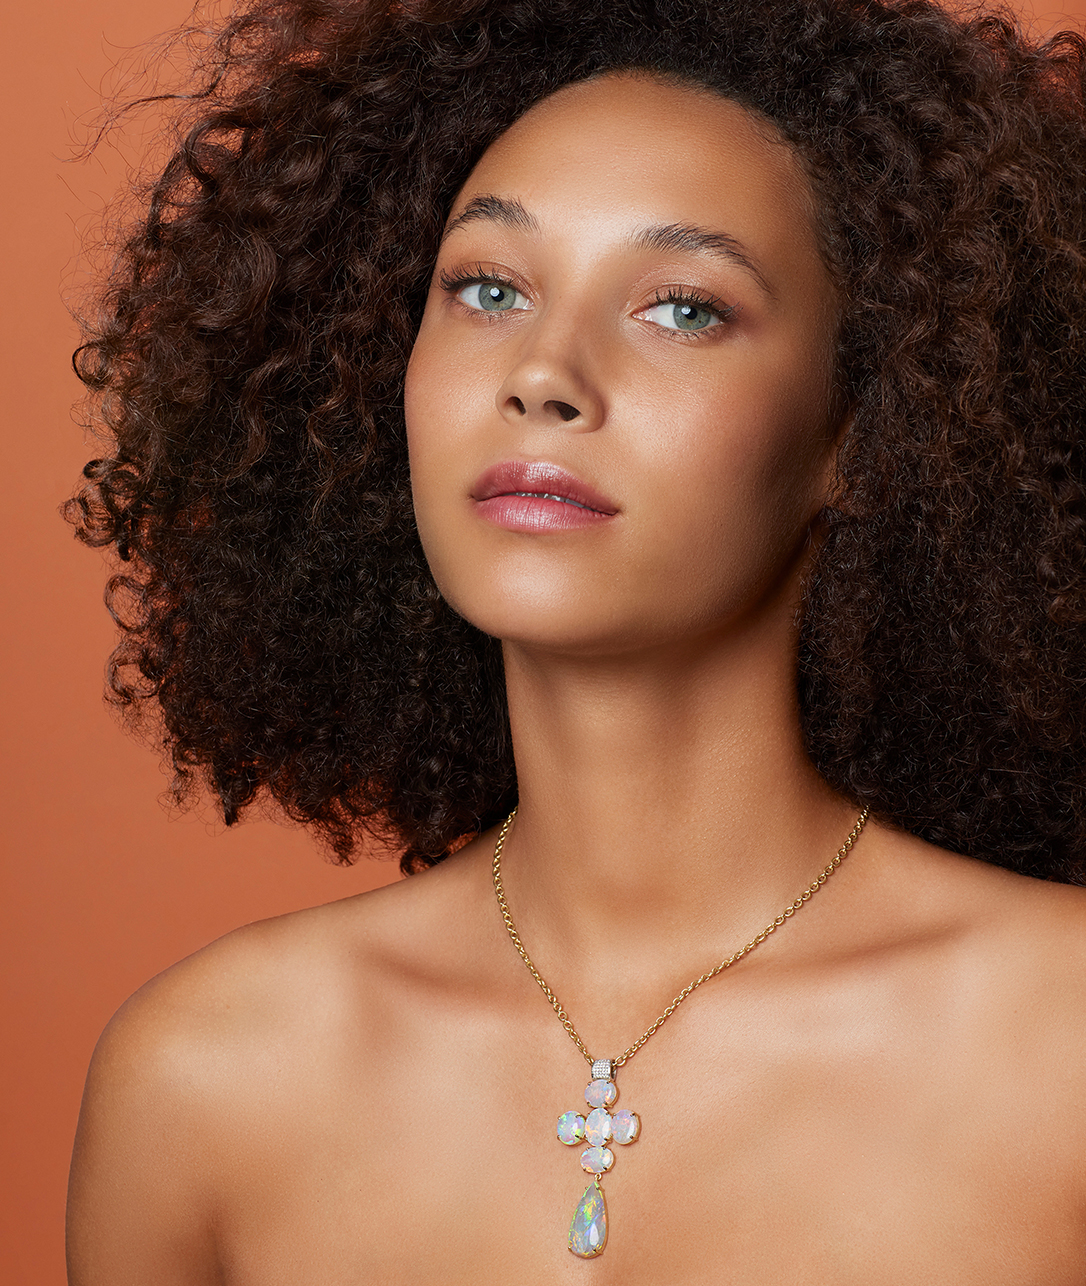 When too much is just not quite enough, just add multi-carat gemstones. Ta-da!SHOP HEAVY PAVÉ BALE PENDANT NECKLACES